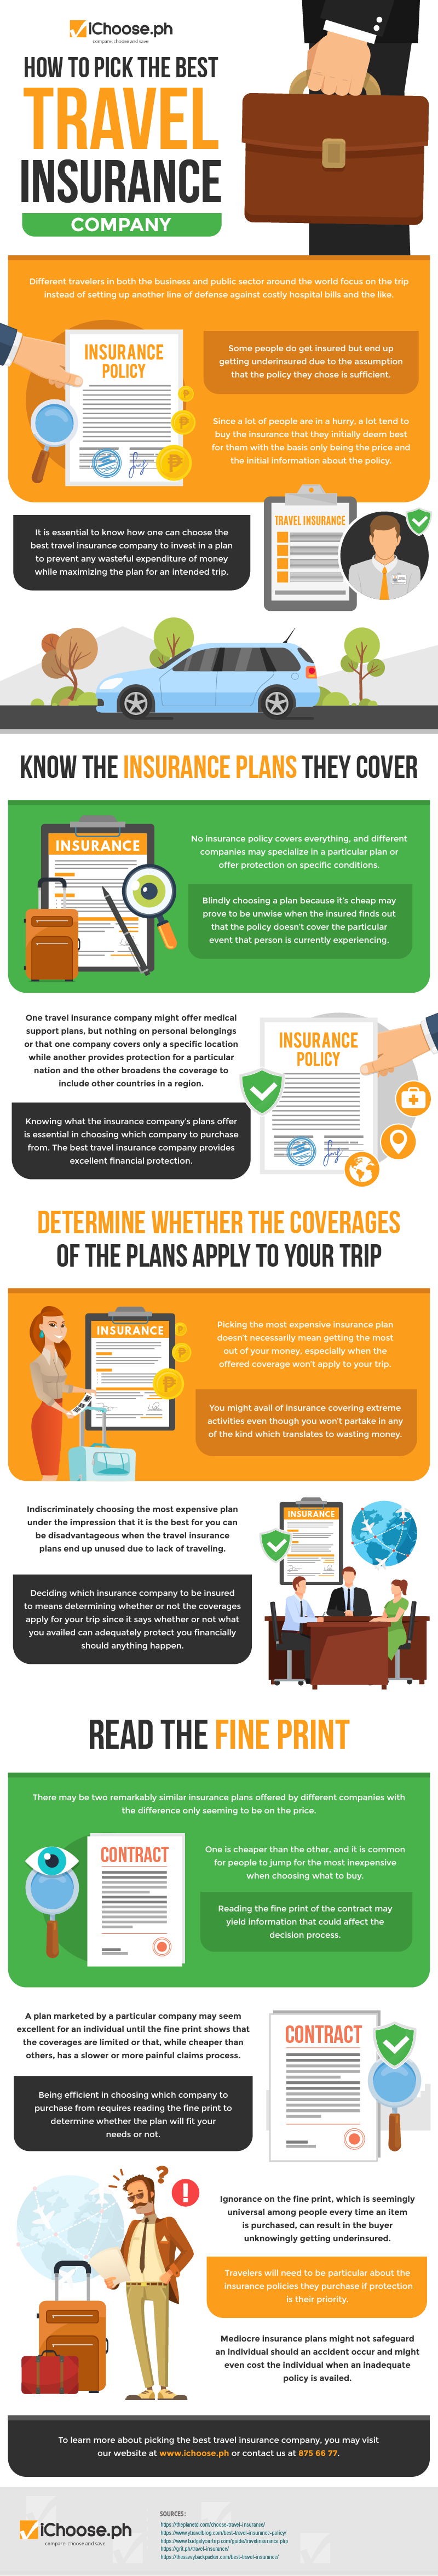 How to Pick the Best Travel Insurance Company